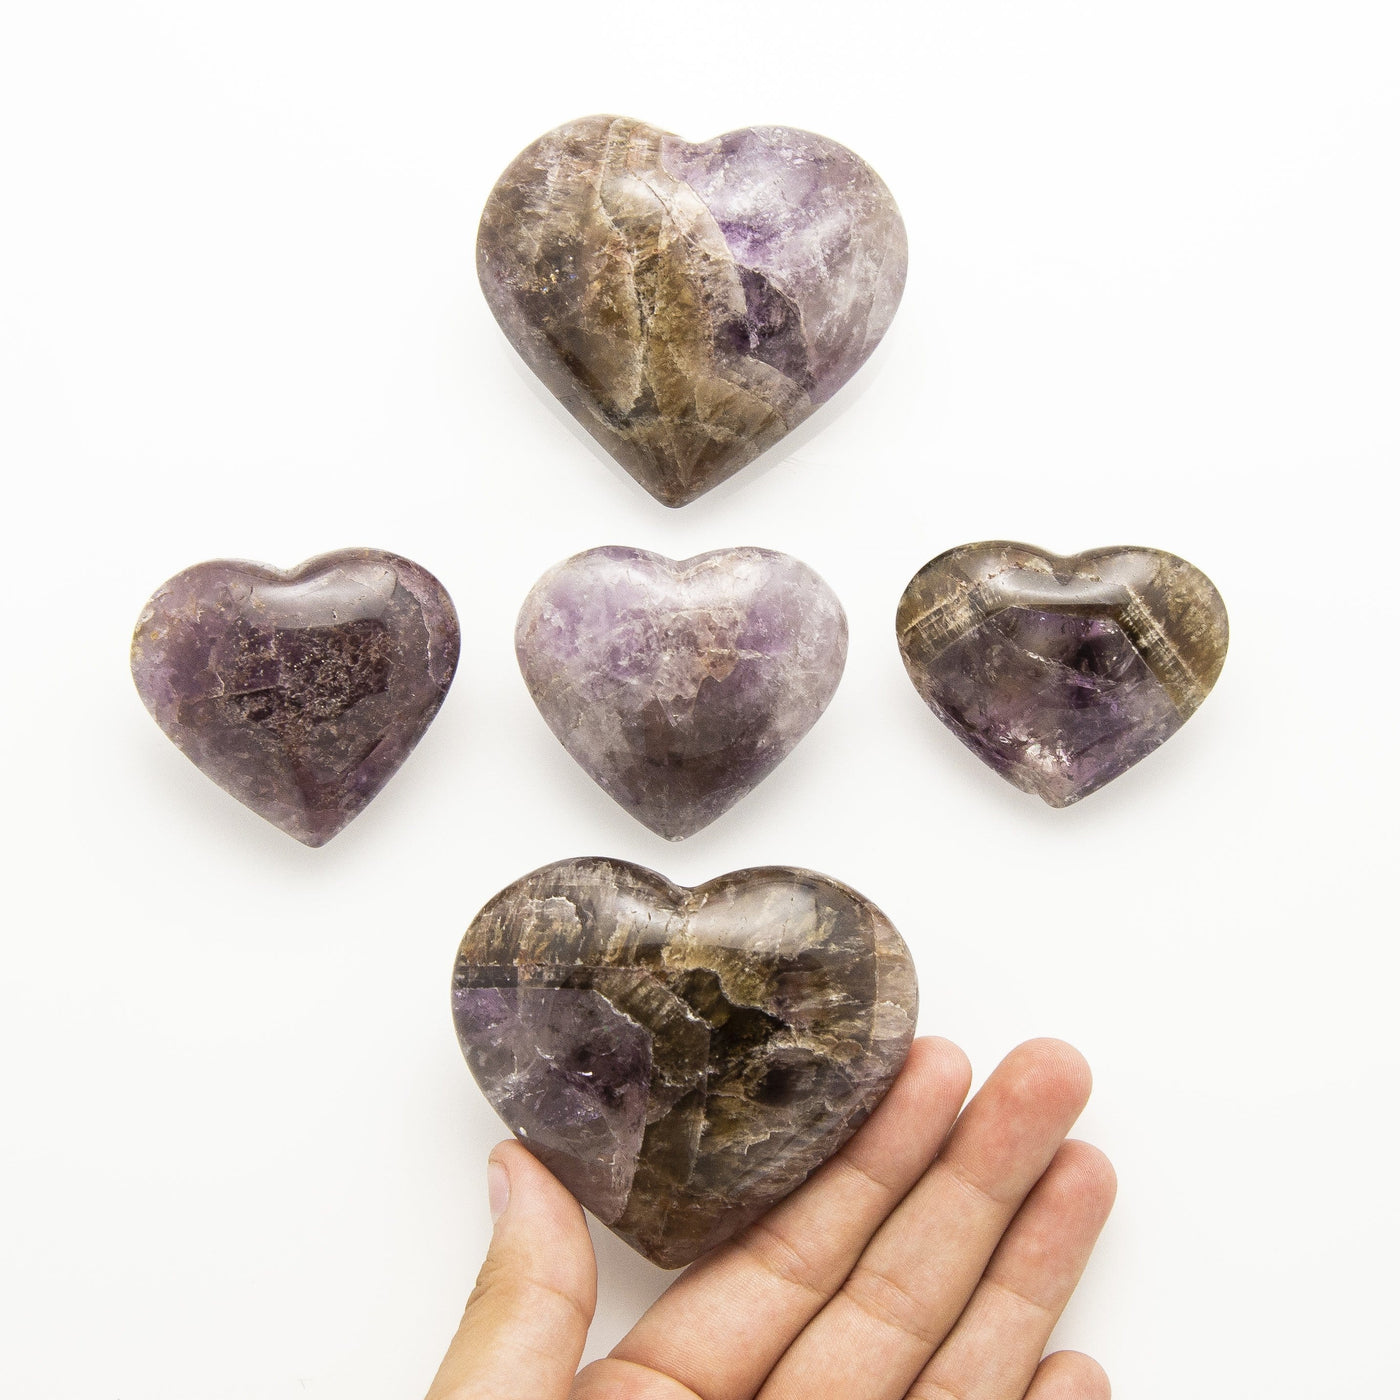 two different sizes of seven mineral stone heart with a hand to show size reference